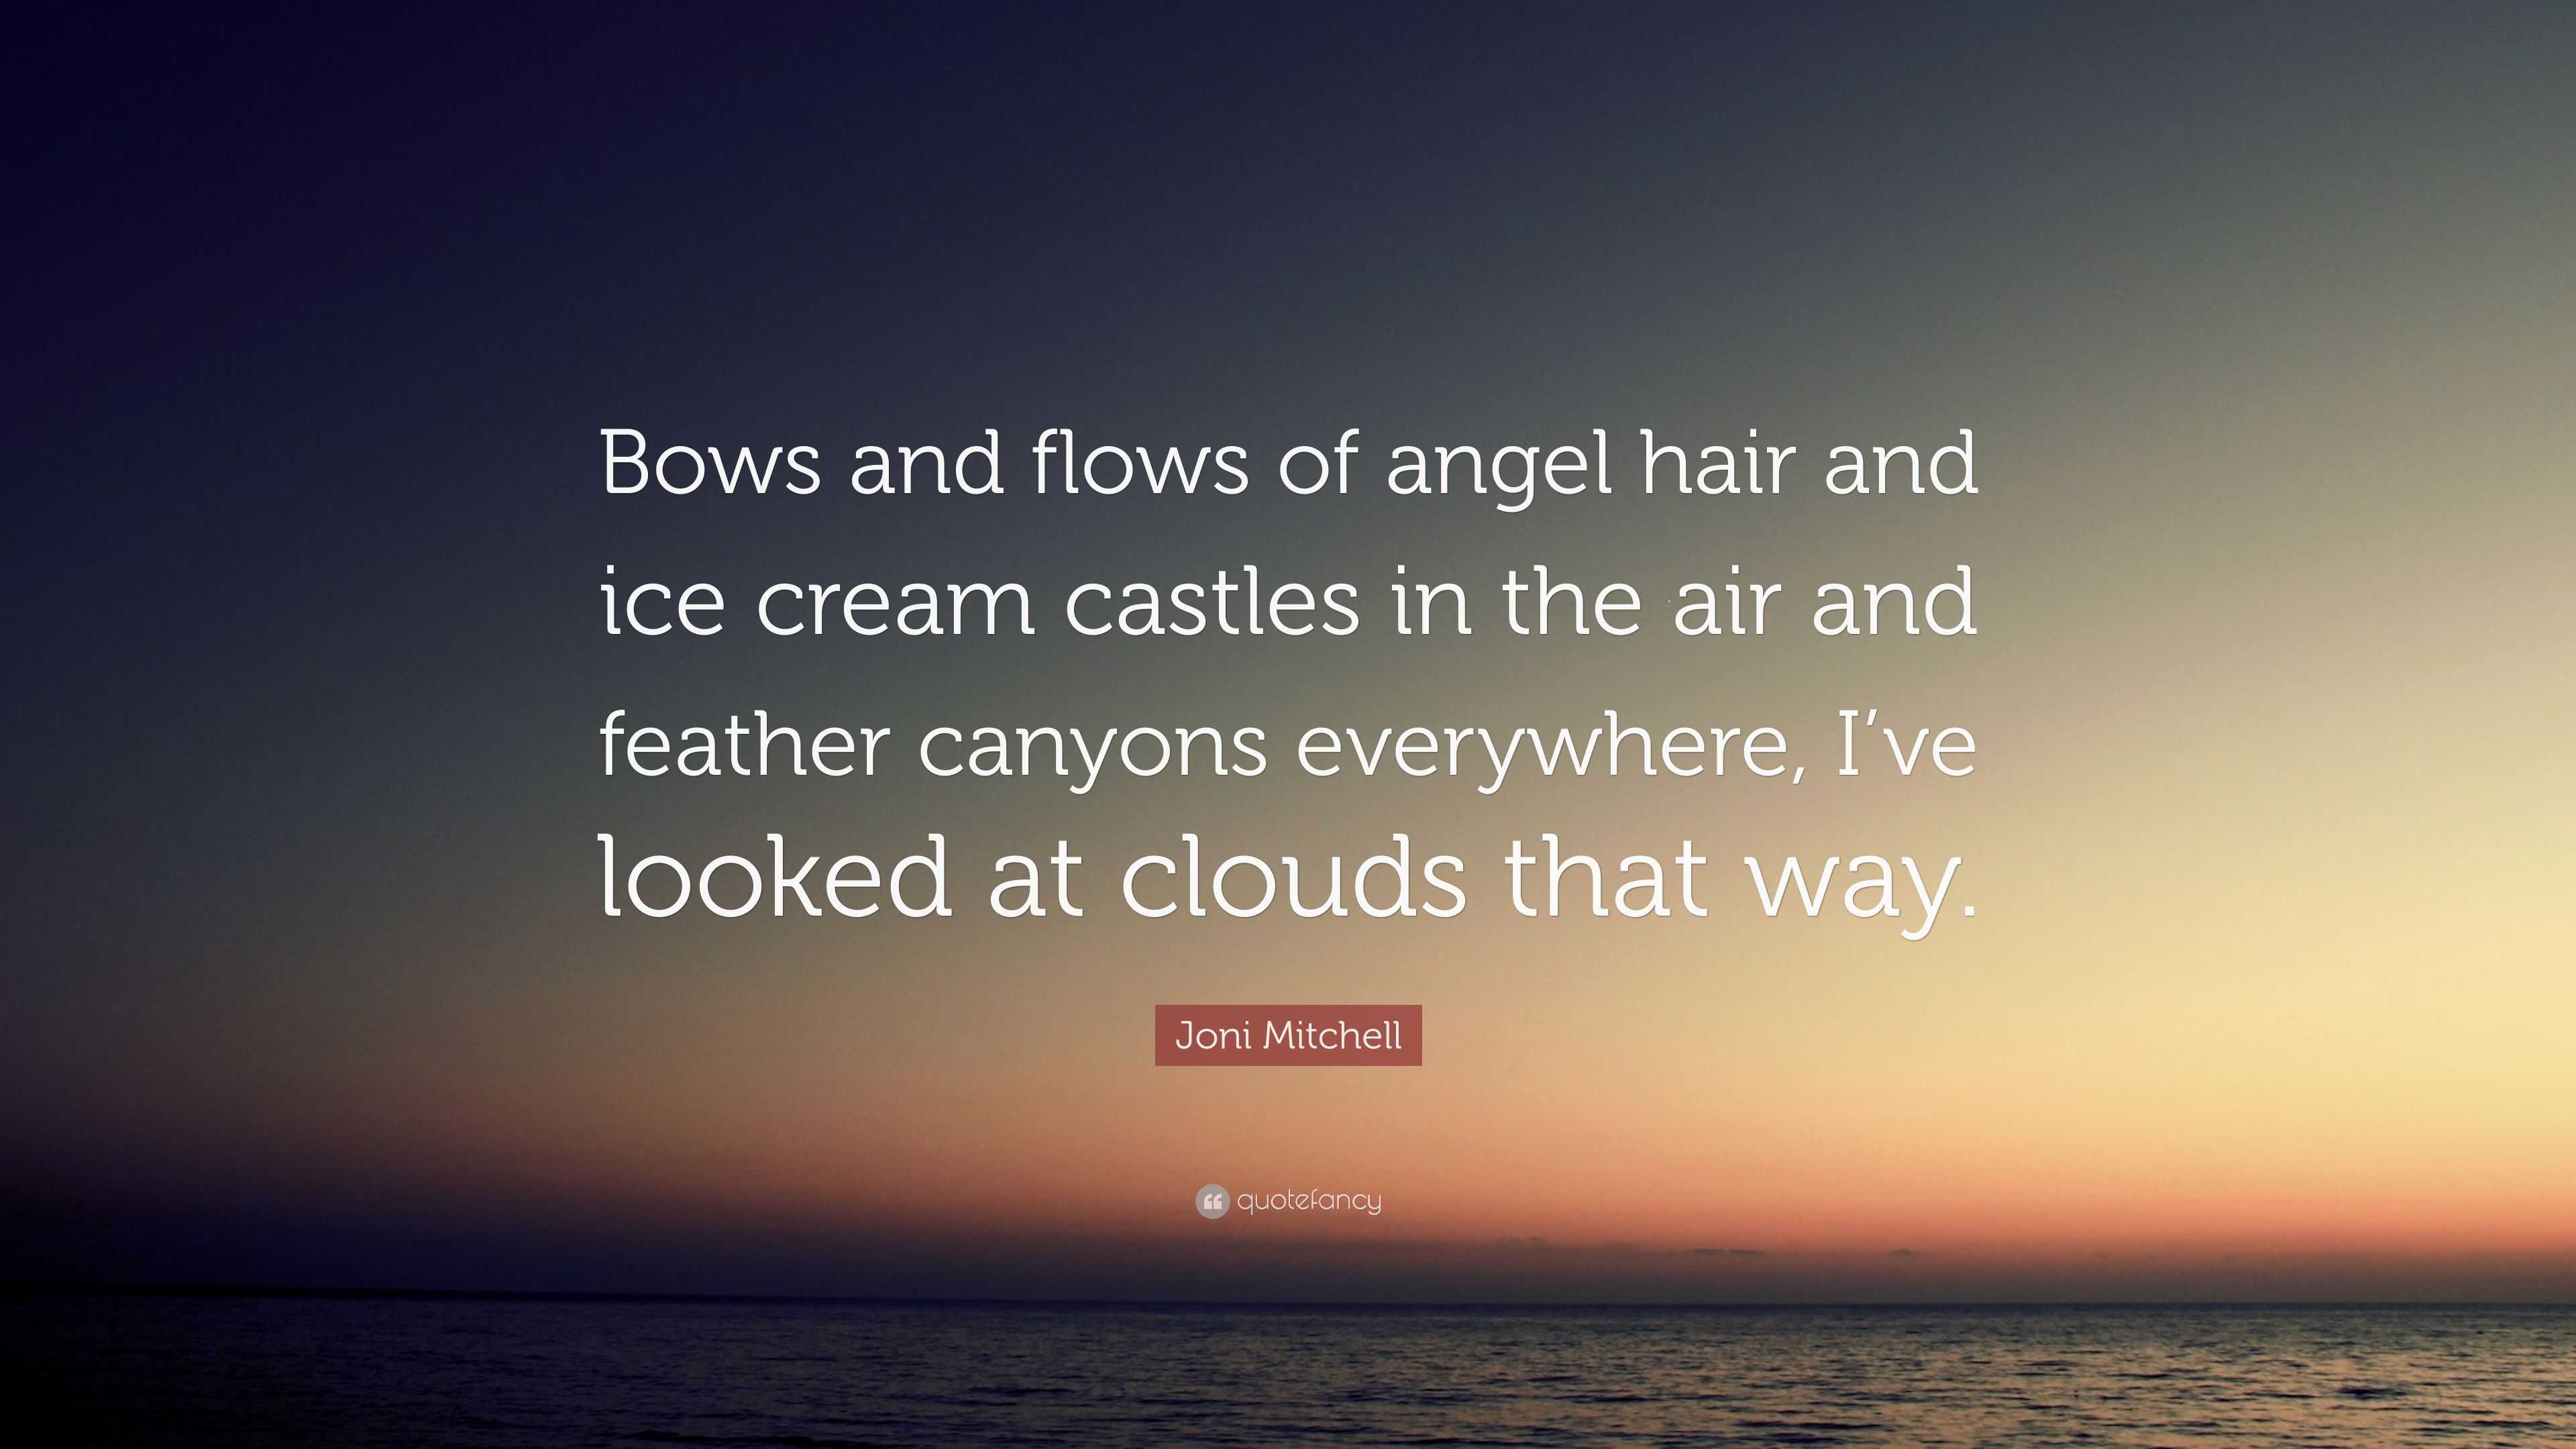 Joni Mitchell Quote: “Bows and flows of angel hair and ice cream castles in  the air and feather canyons everywhere, I've looked at clouds that...”